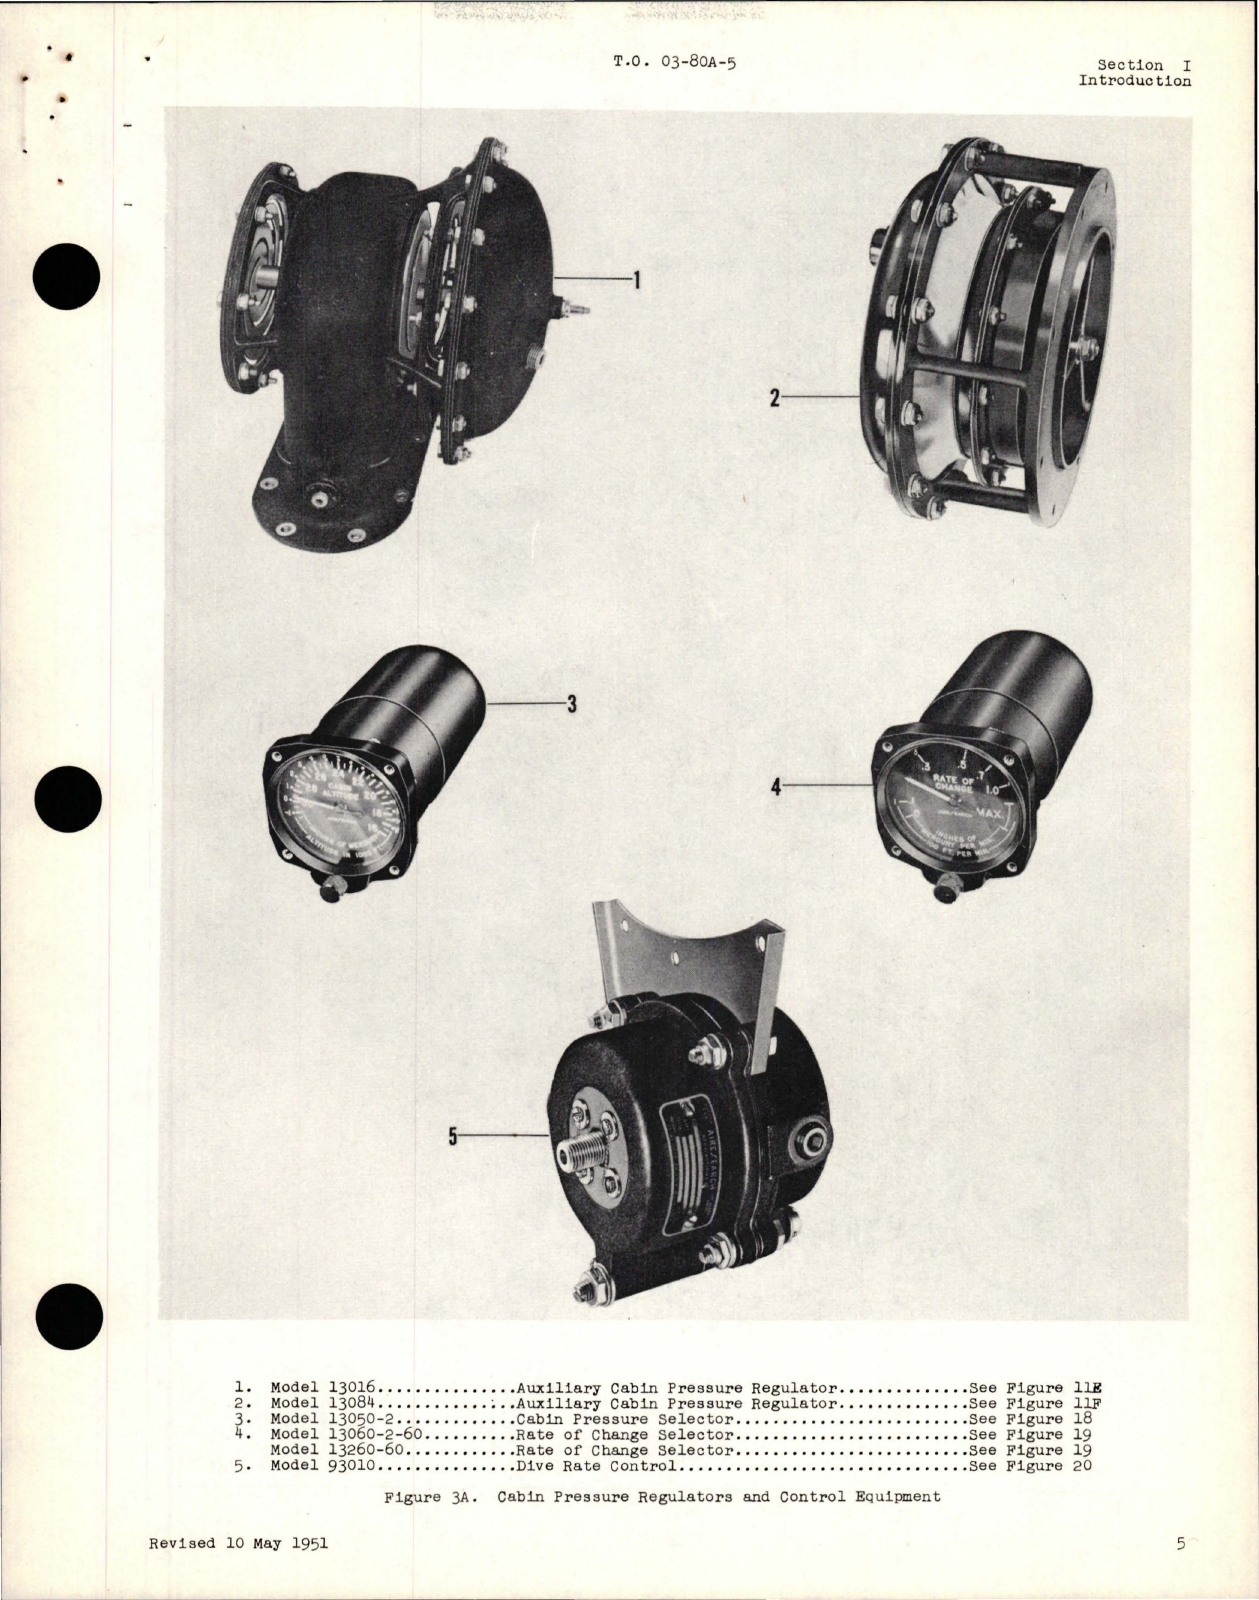 Sample page 9 from AirCorps Library document: Parts Catalog for Cabin Pressure Regulators